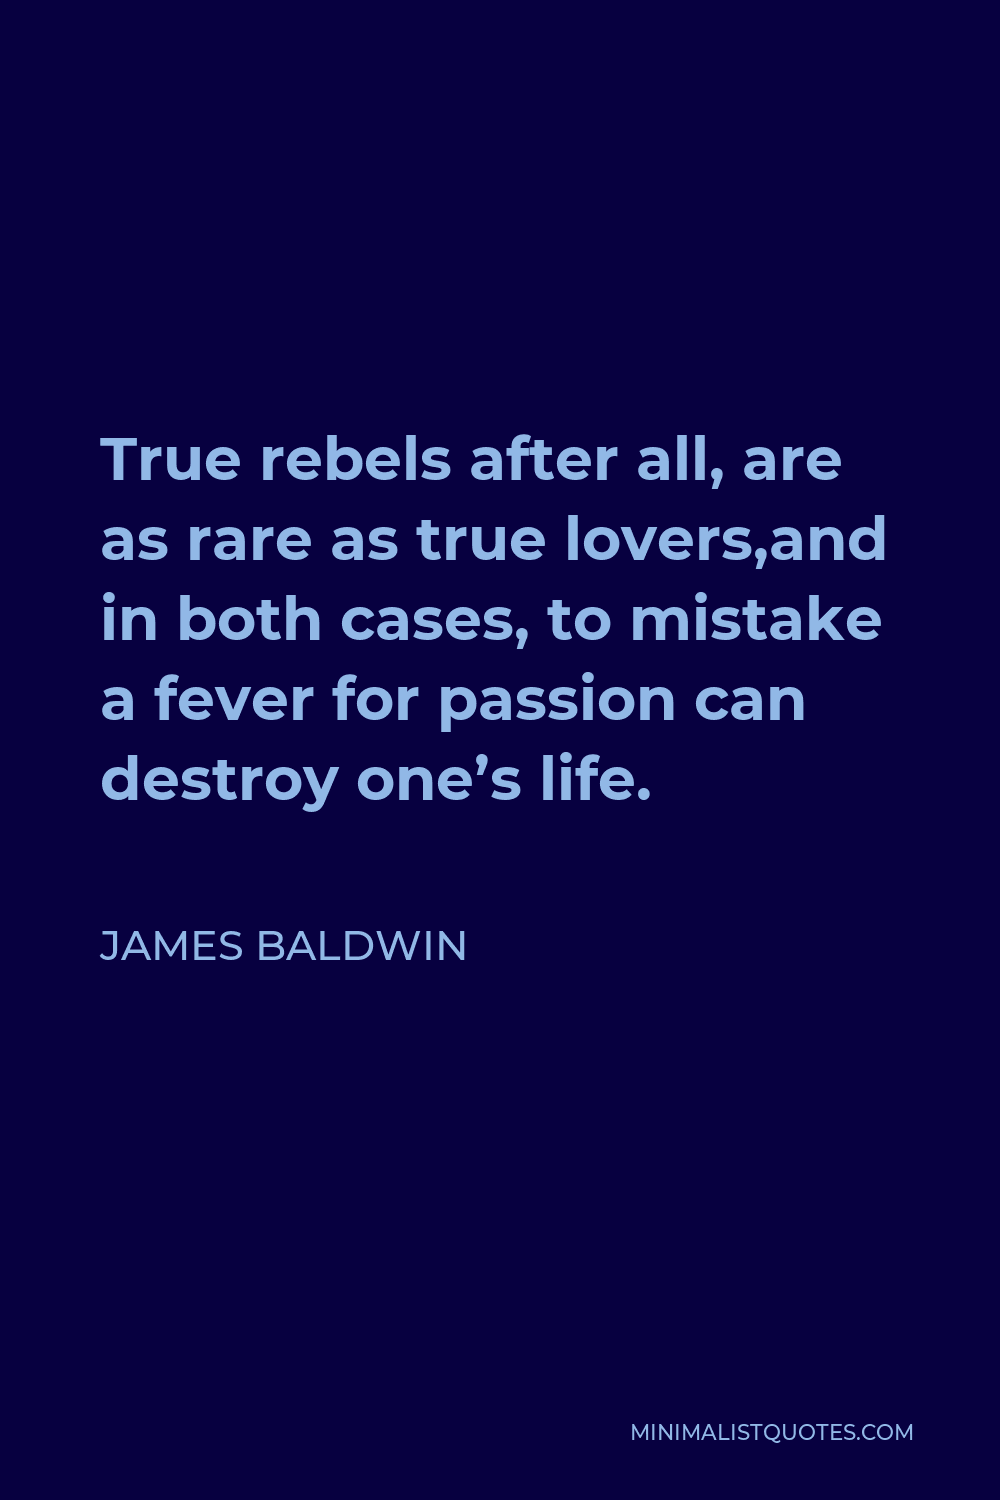 James Baldwin Quote - True rebels after all, are as rare as true lovers,and in both cases, to mistake a fever for passion can destroy one’s life.